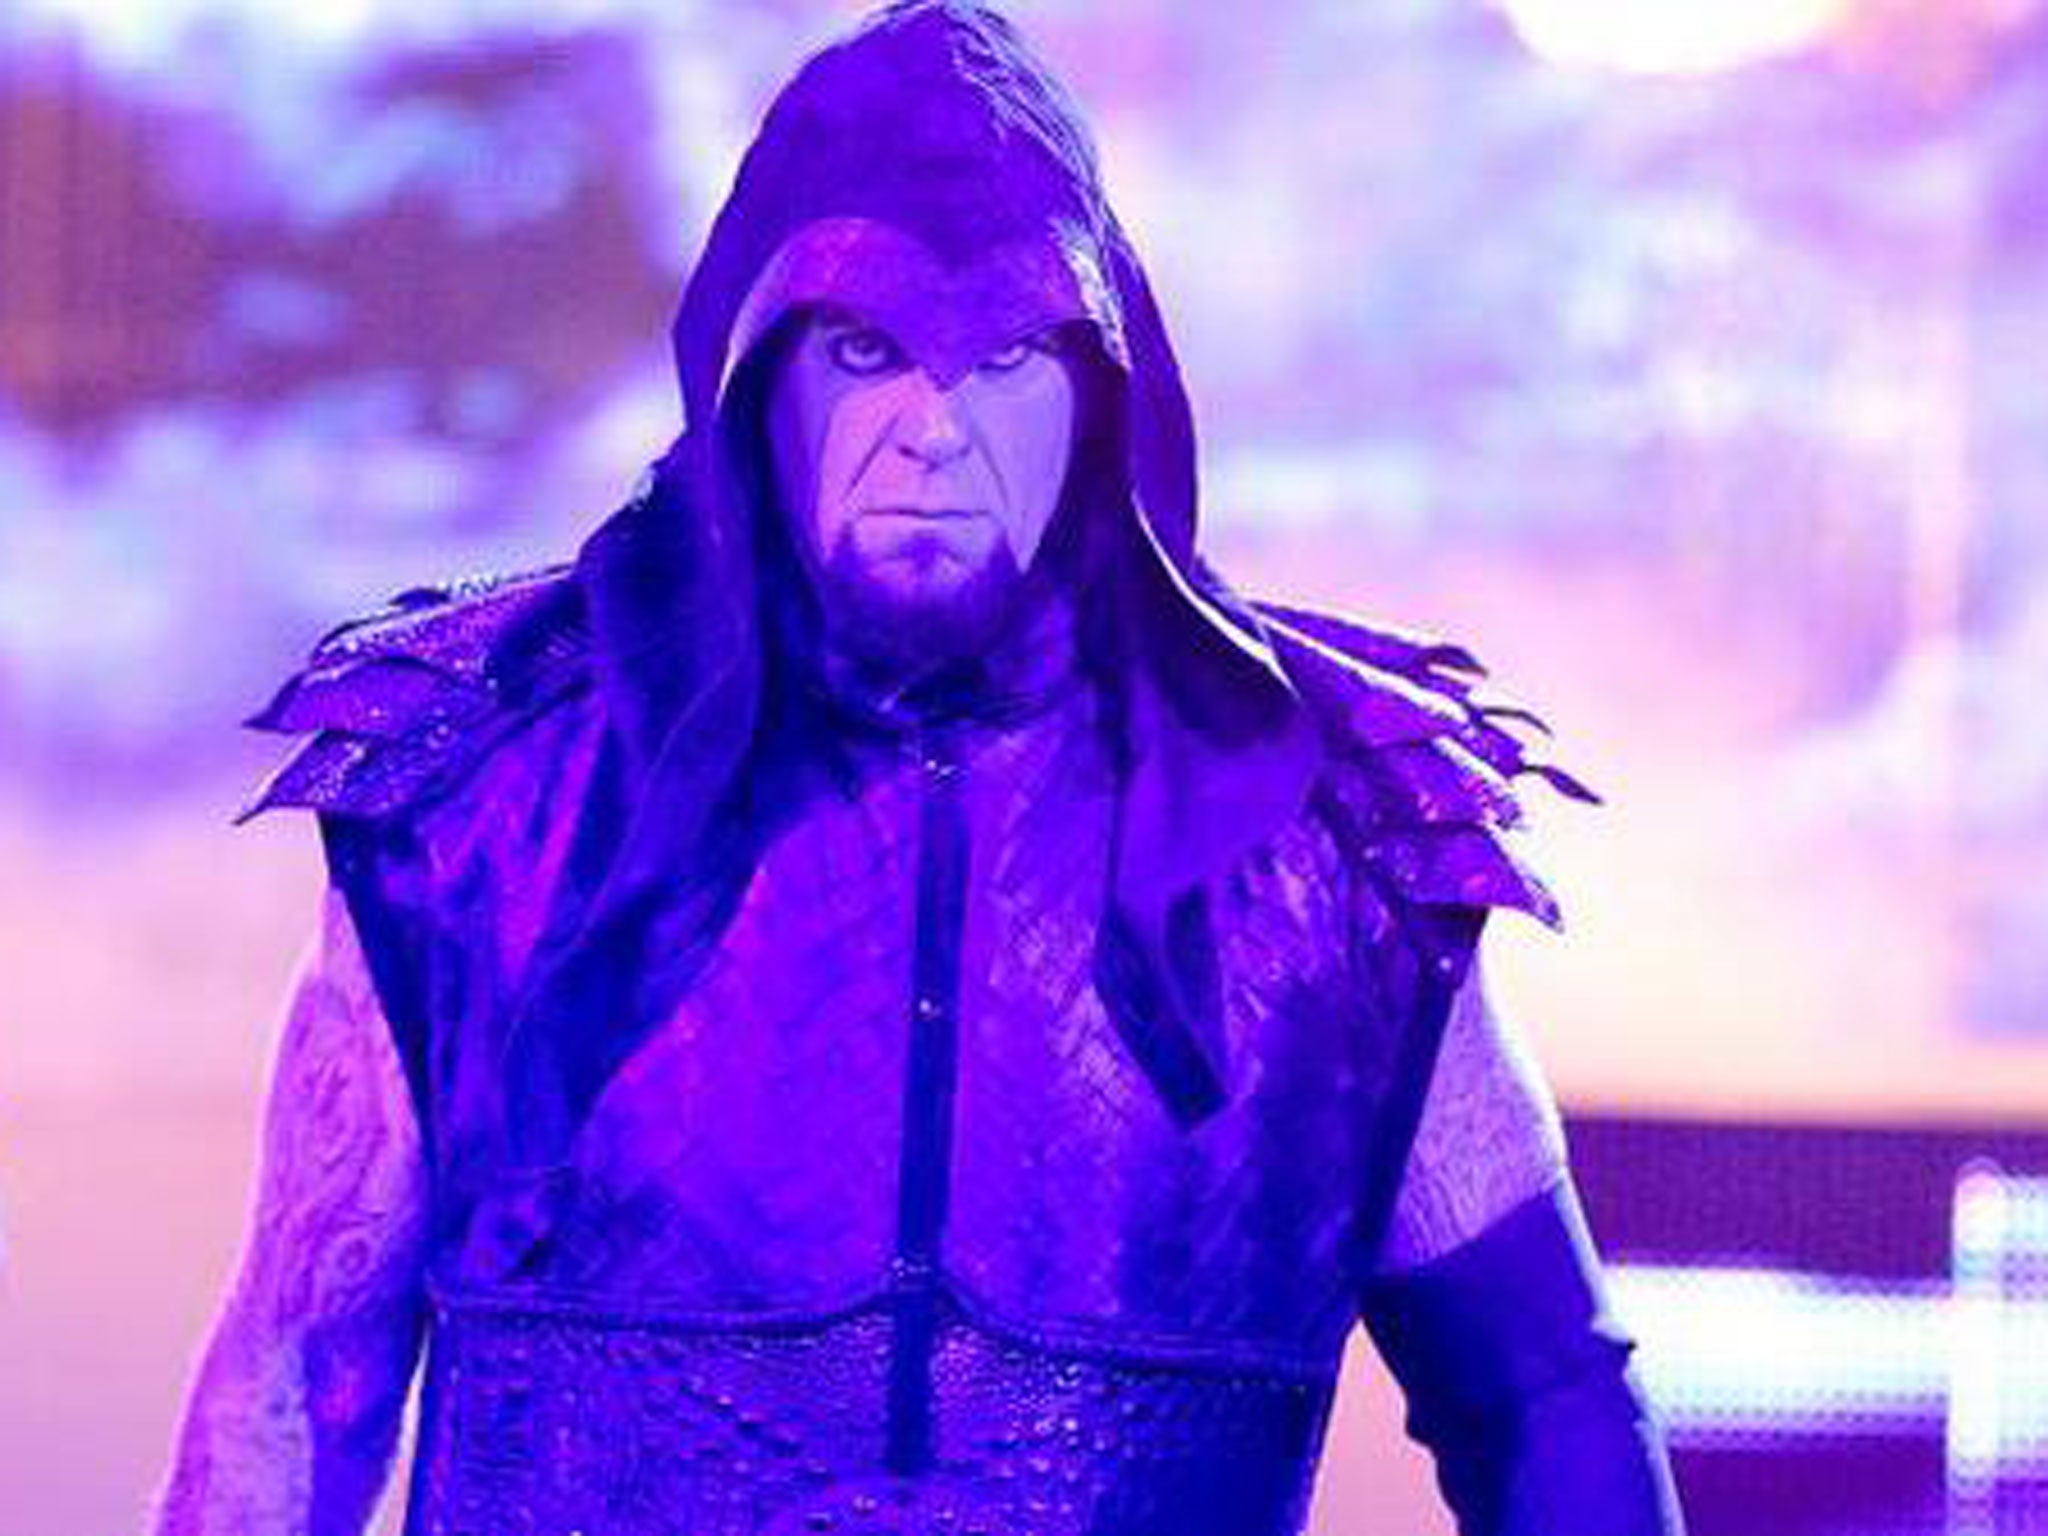 The Undertaker makes his return to Raw to confront Brock Lesnar